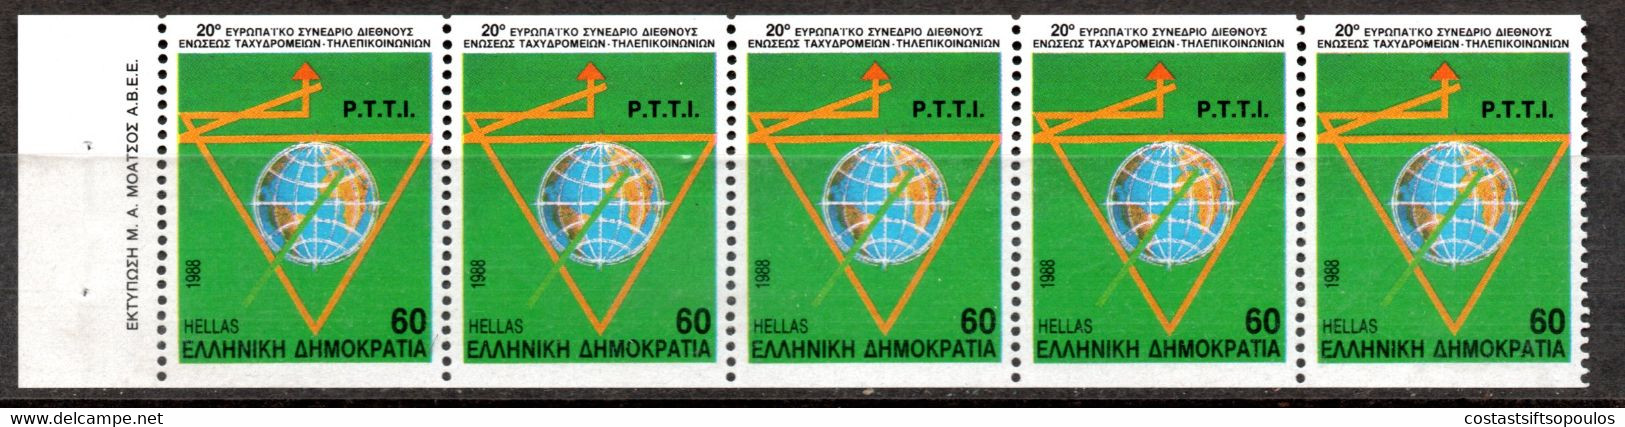 20.GREECE.1988 P.T.T.I. CONFERENCE IMPERF.X PERF.HELLAS 1803A,1803B,VERY FINE MNH BOOKLET PANE OF 5 - Other & Unclassified